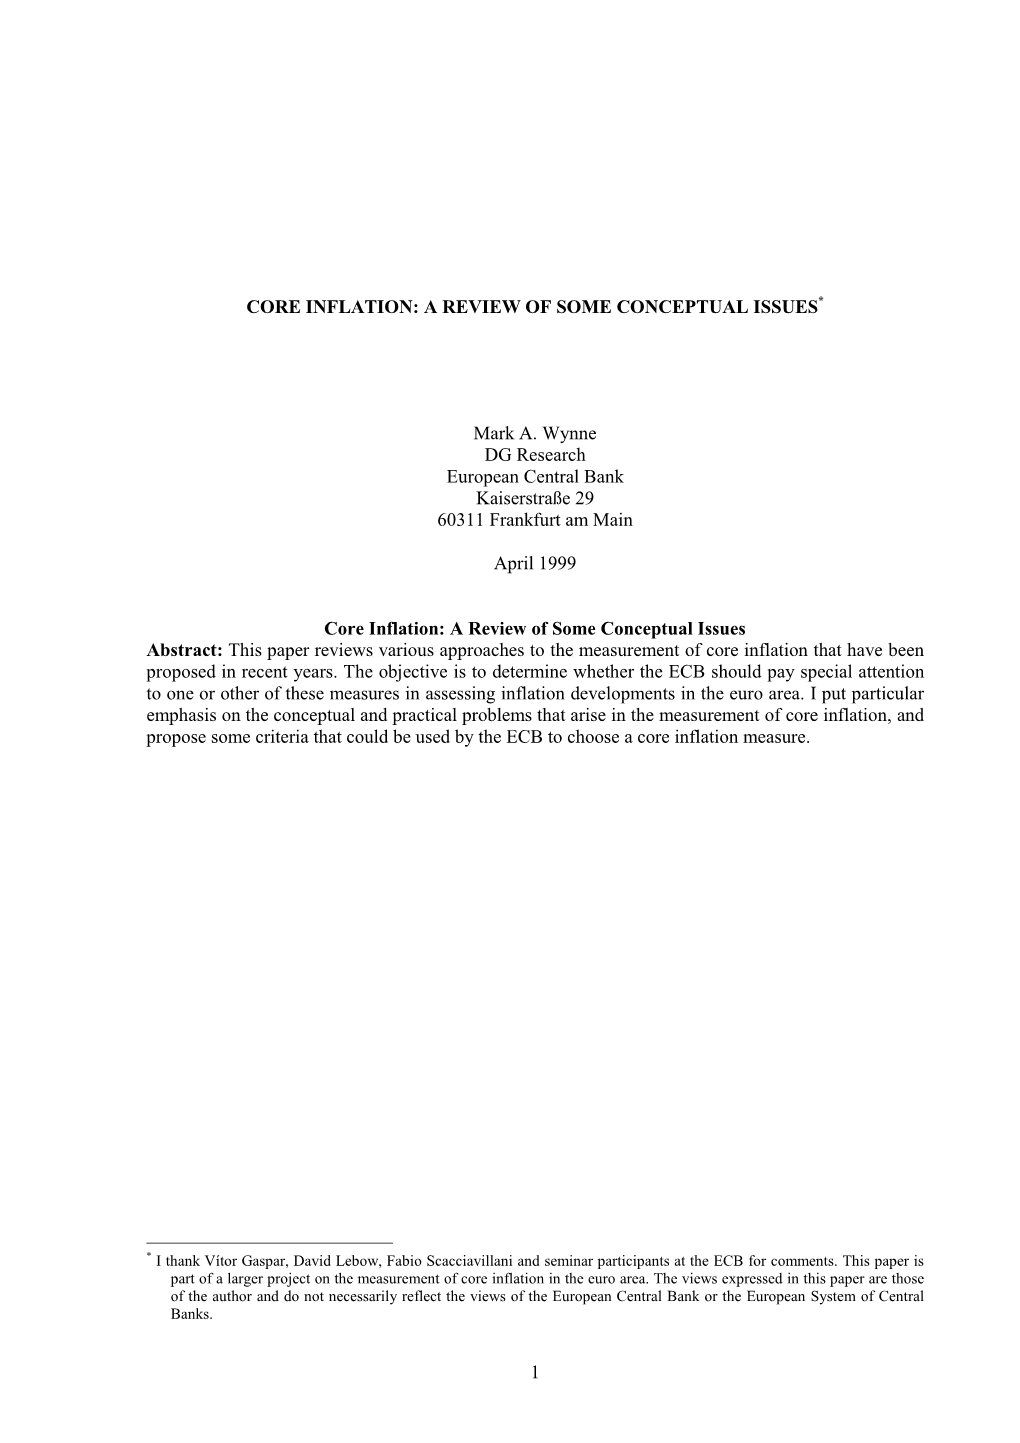 Core Inflation: a Review of Some Conceptual Issues*